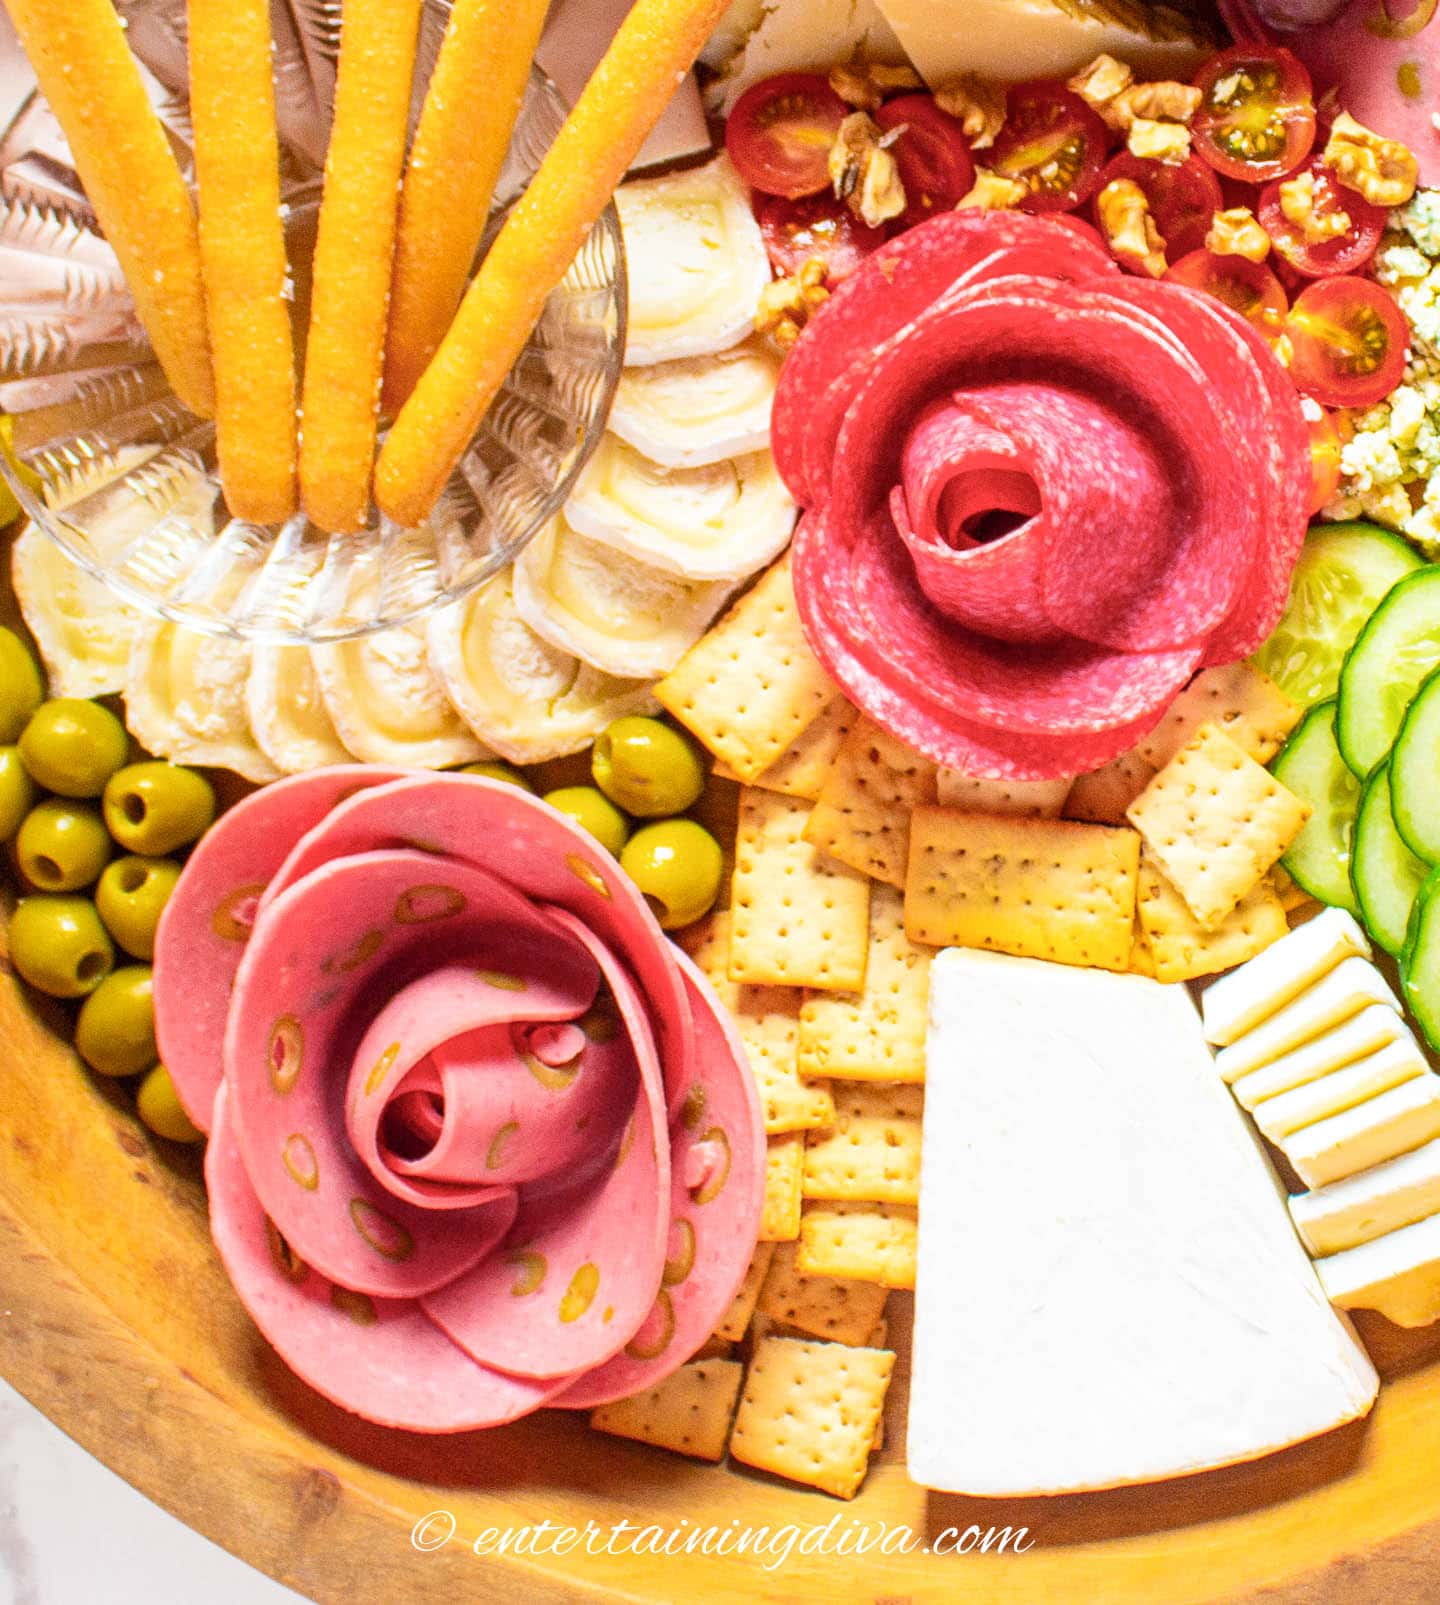 A Charcuterie board with meat slices made into roses